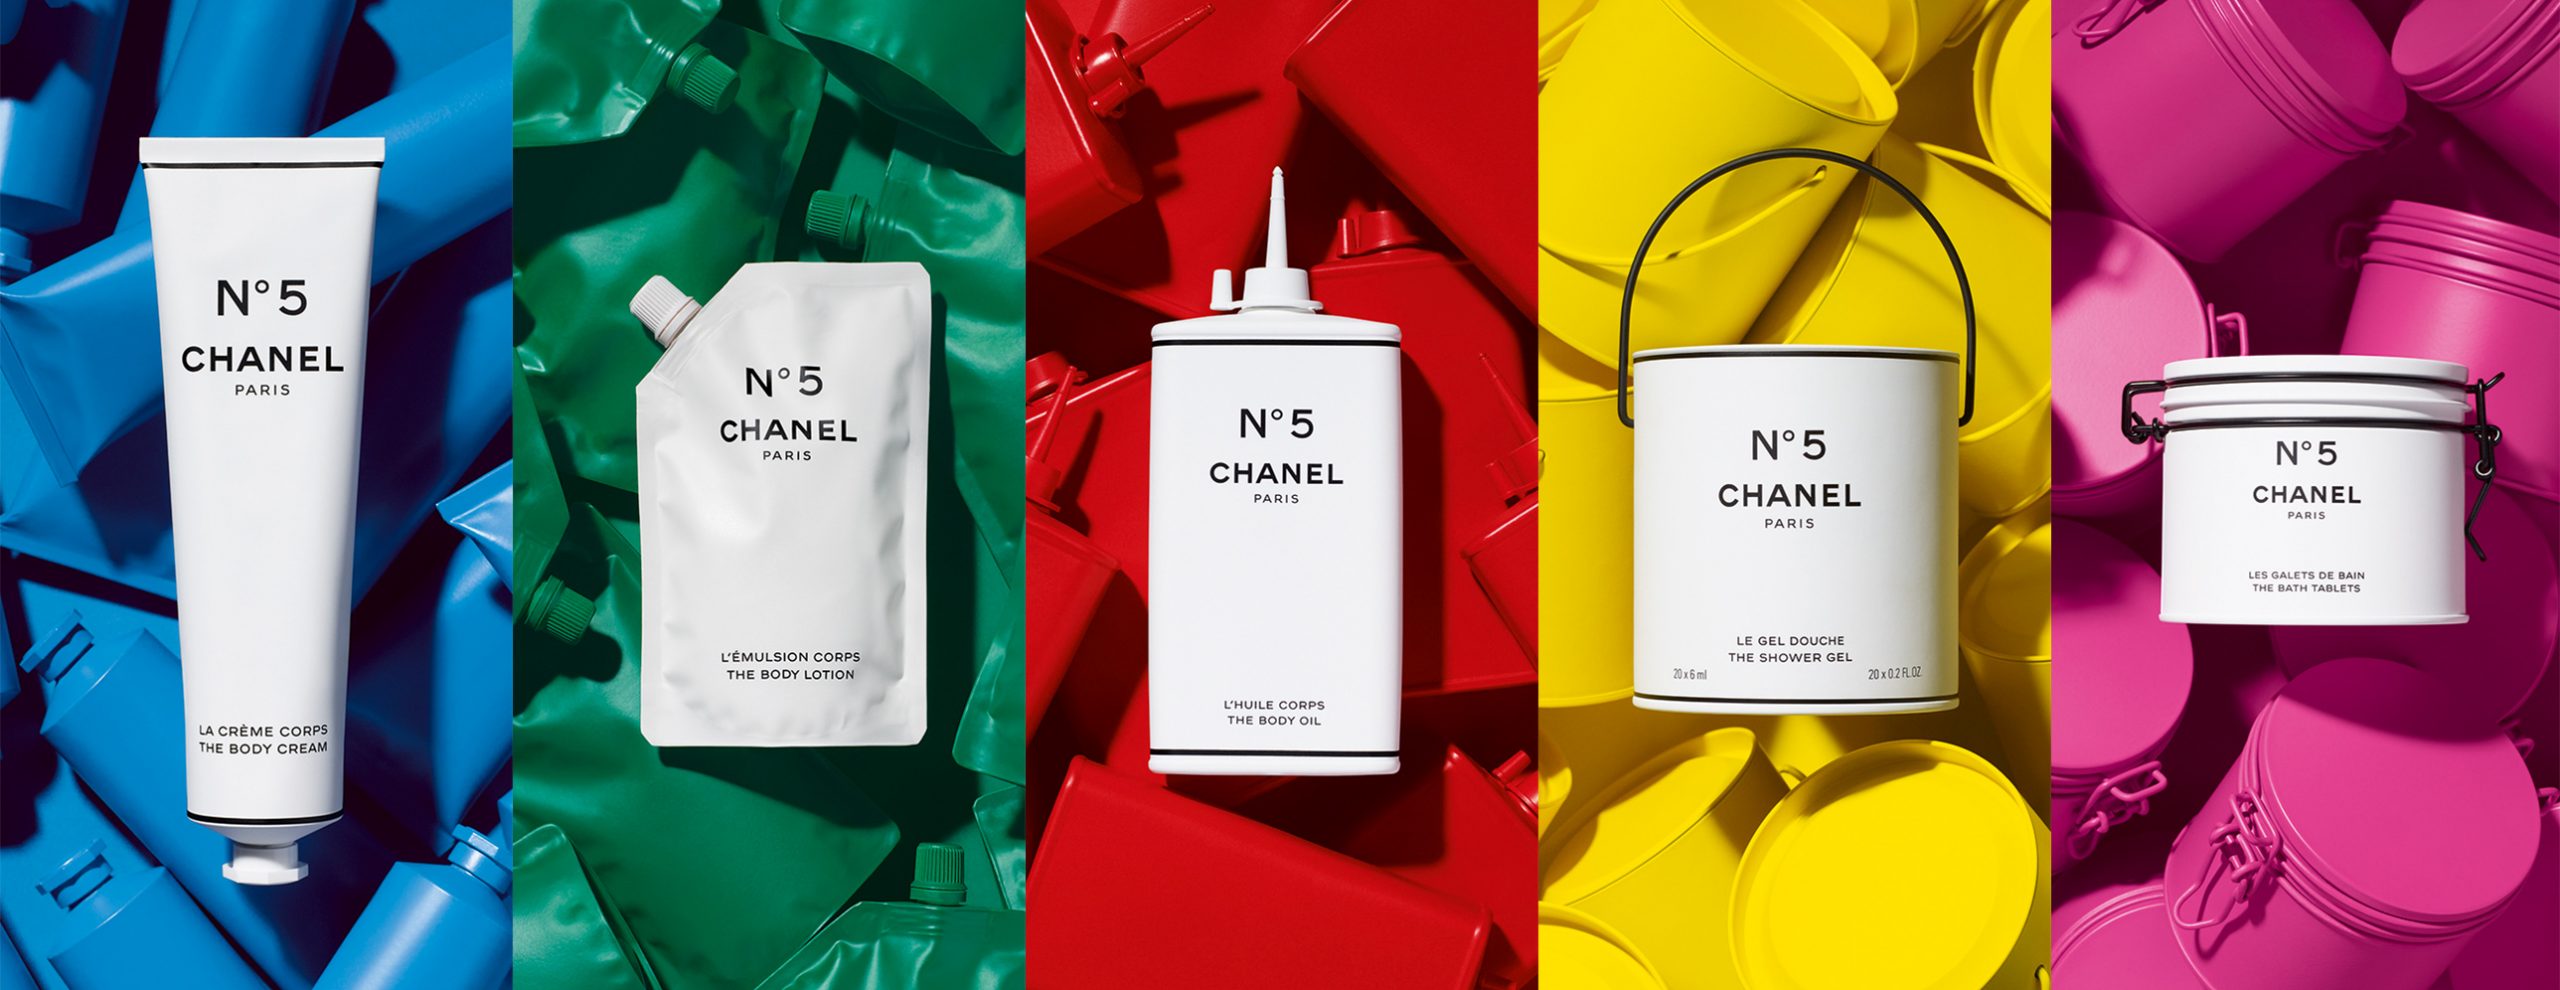 The CHANEL FACTORY 5 Collection includes 17 new products that take